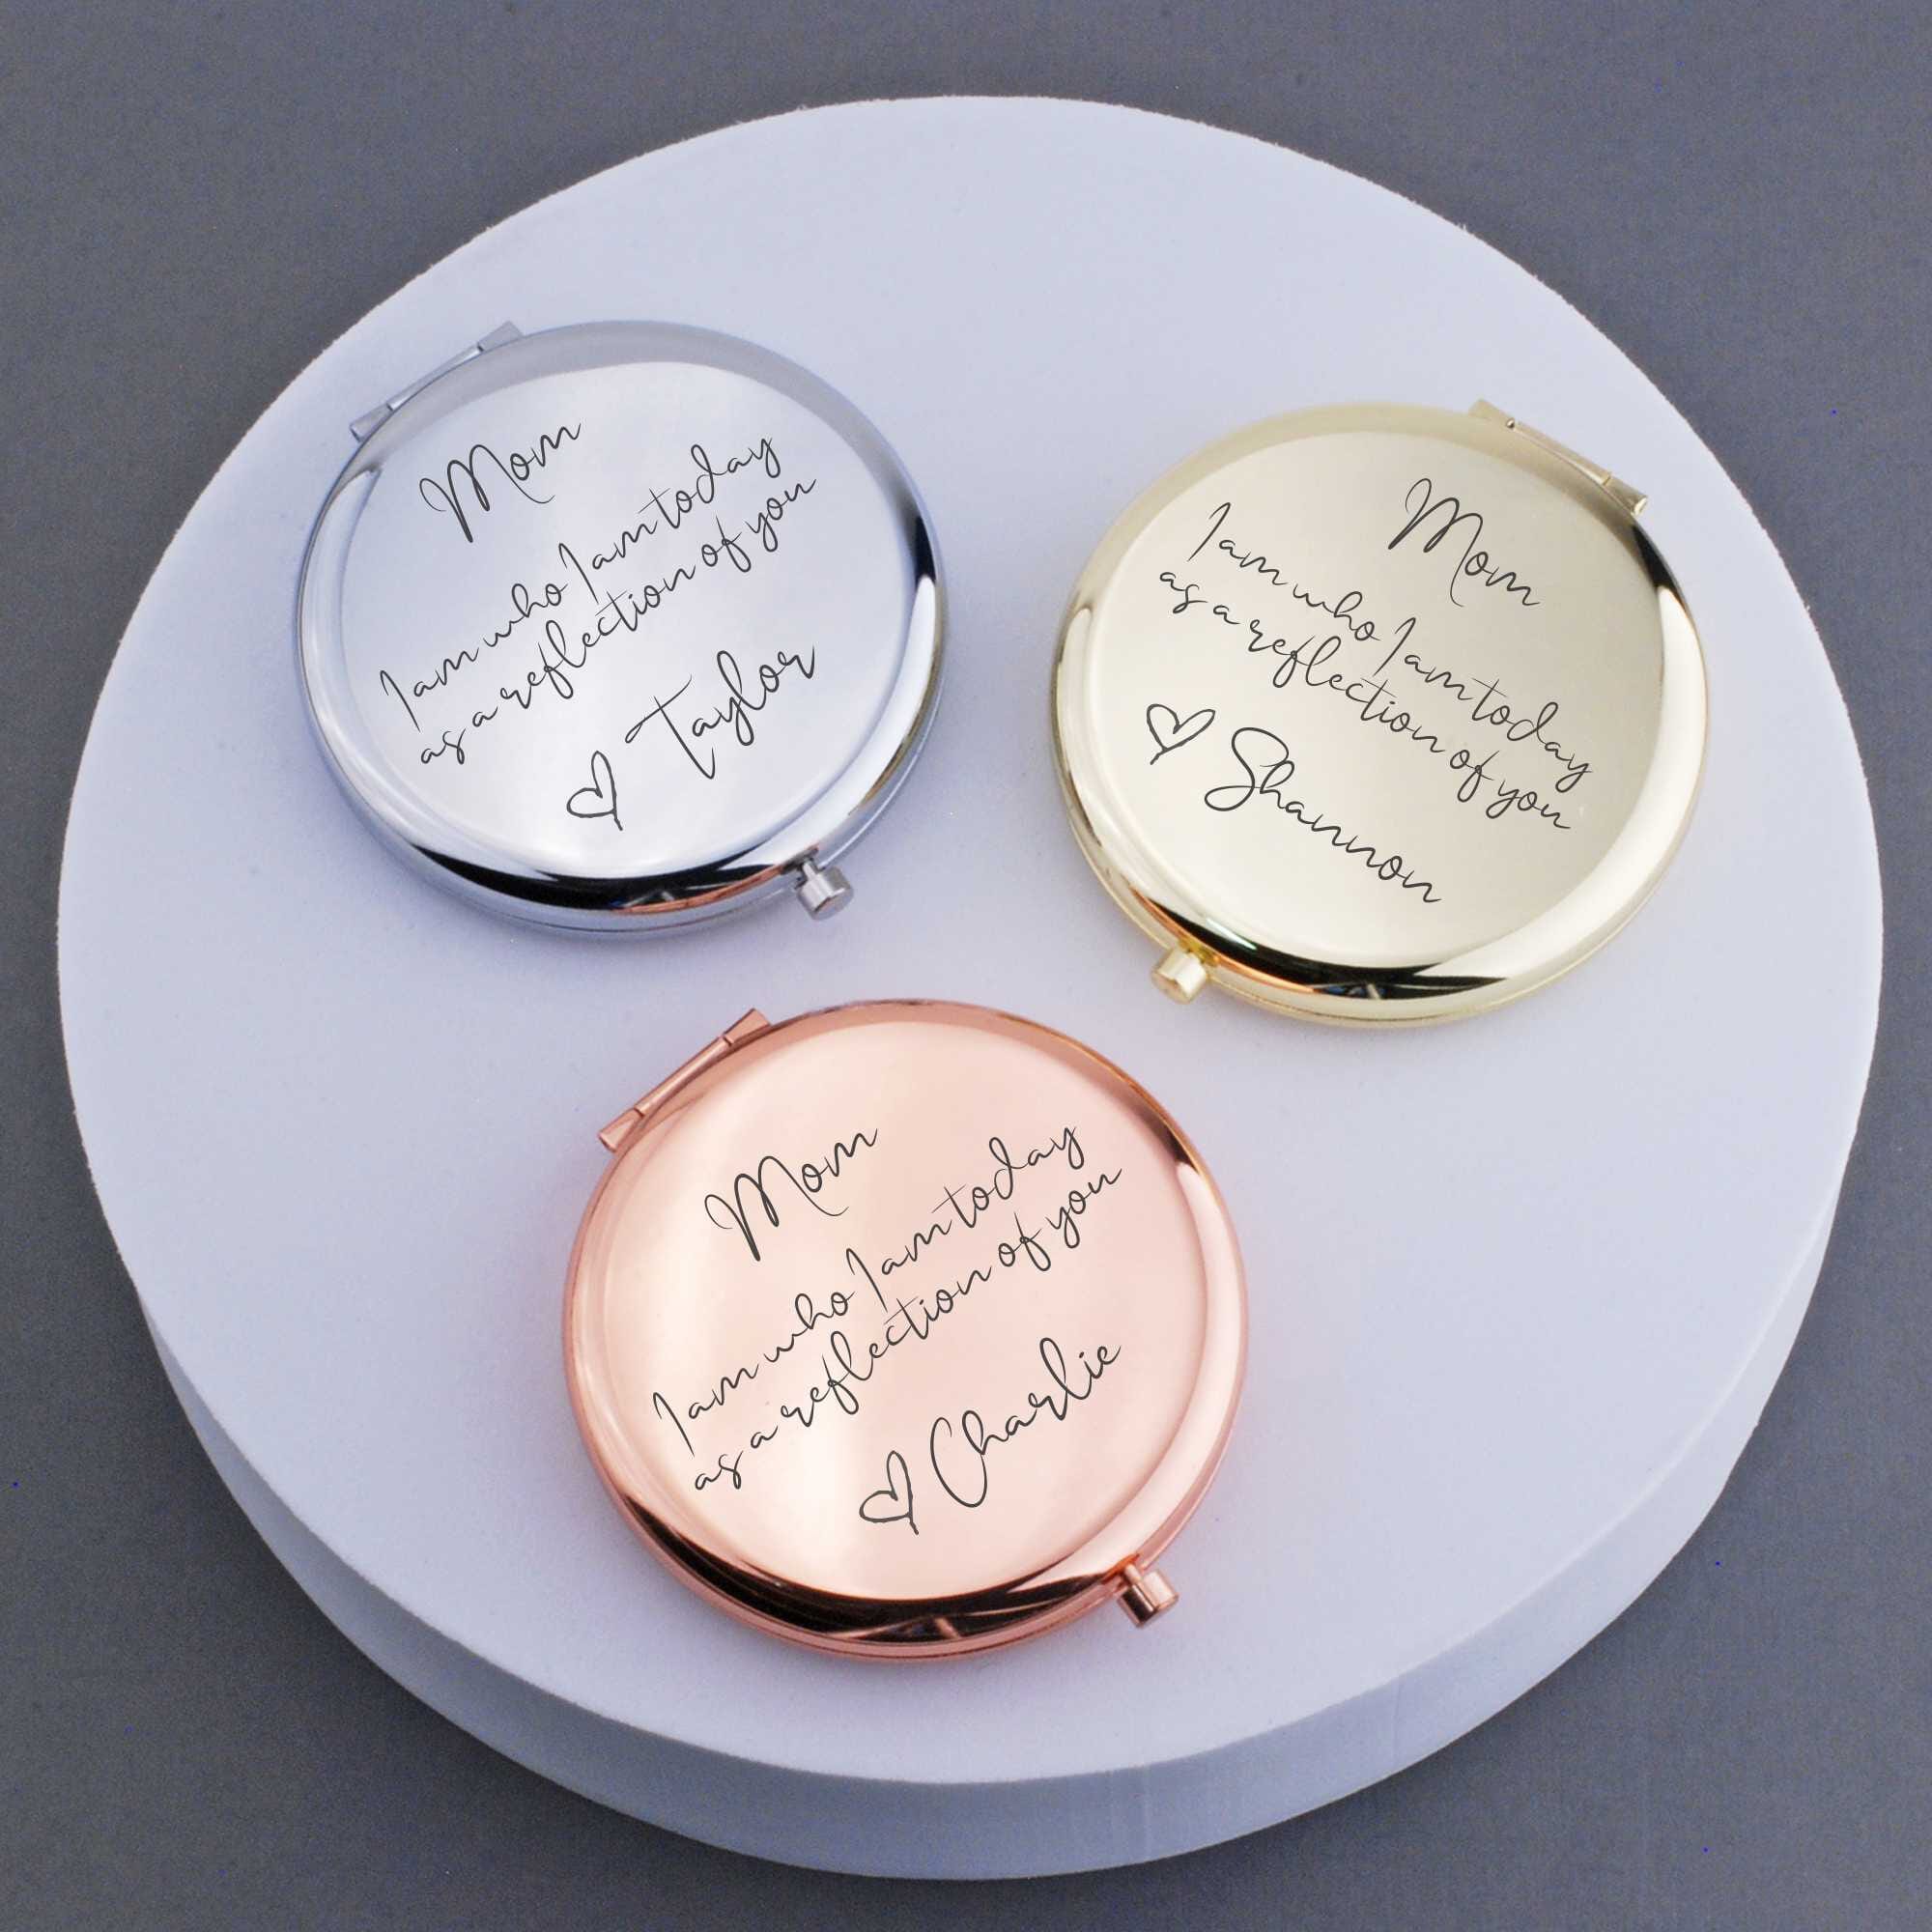 Mom Birthday Gifts for Mom - I Love You Mom Rose Gold Compact Mirror I Gifts for Mom from Daughter I Mom Gifts for Birthday I Mom Gifts for